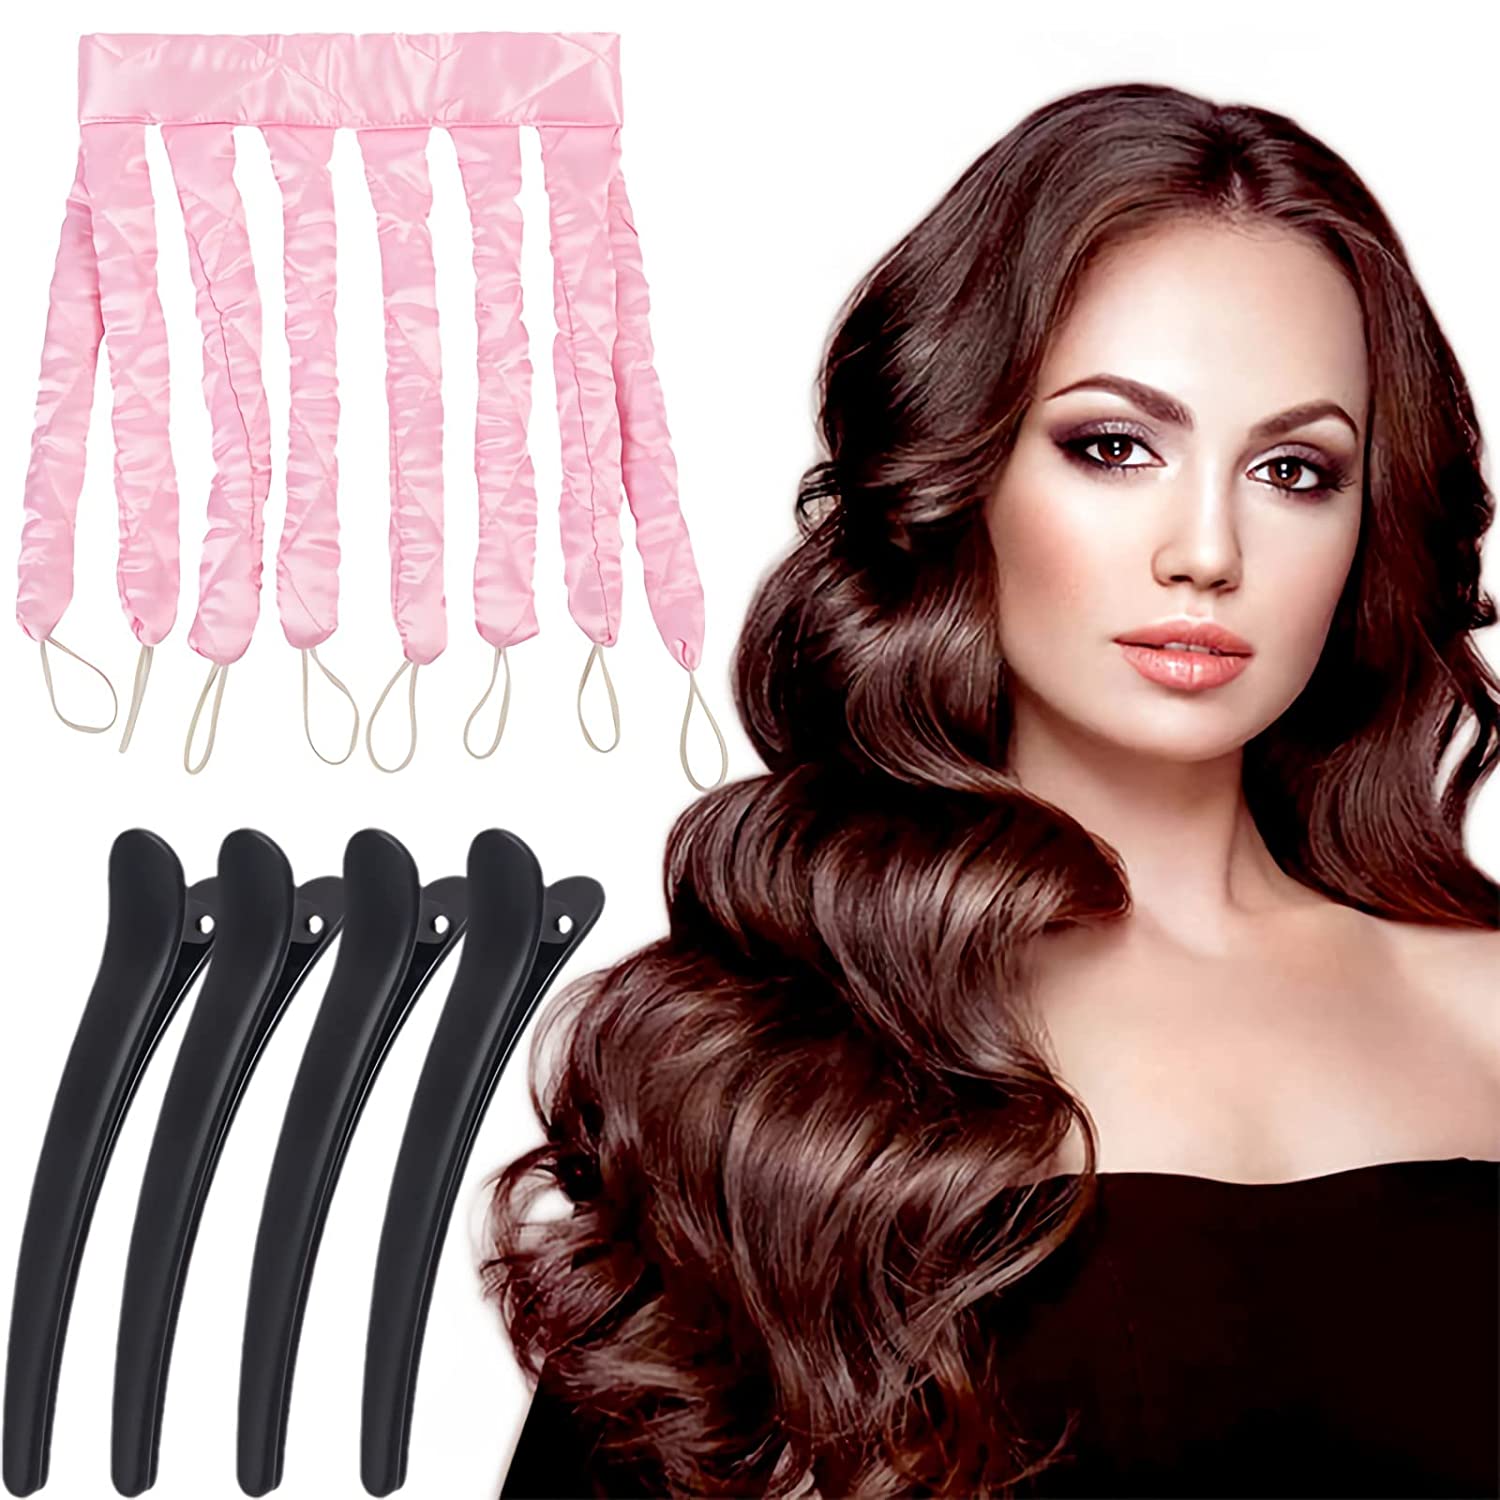 DKDDSSS Heatless Hair Curler, Octopus Heatless Curler, Heatless Curls Band with Hairpin, Heatless Curls Ribbon Will Not Injure The Hair, Hair Rollers for Girls and Women, DIY Styling (Pink), ‎pink